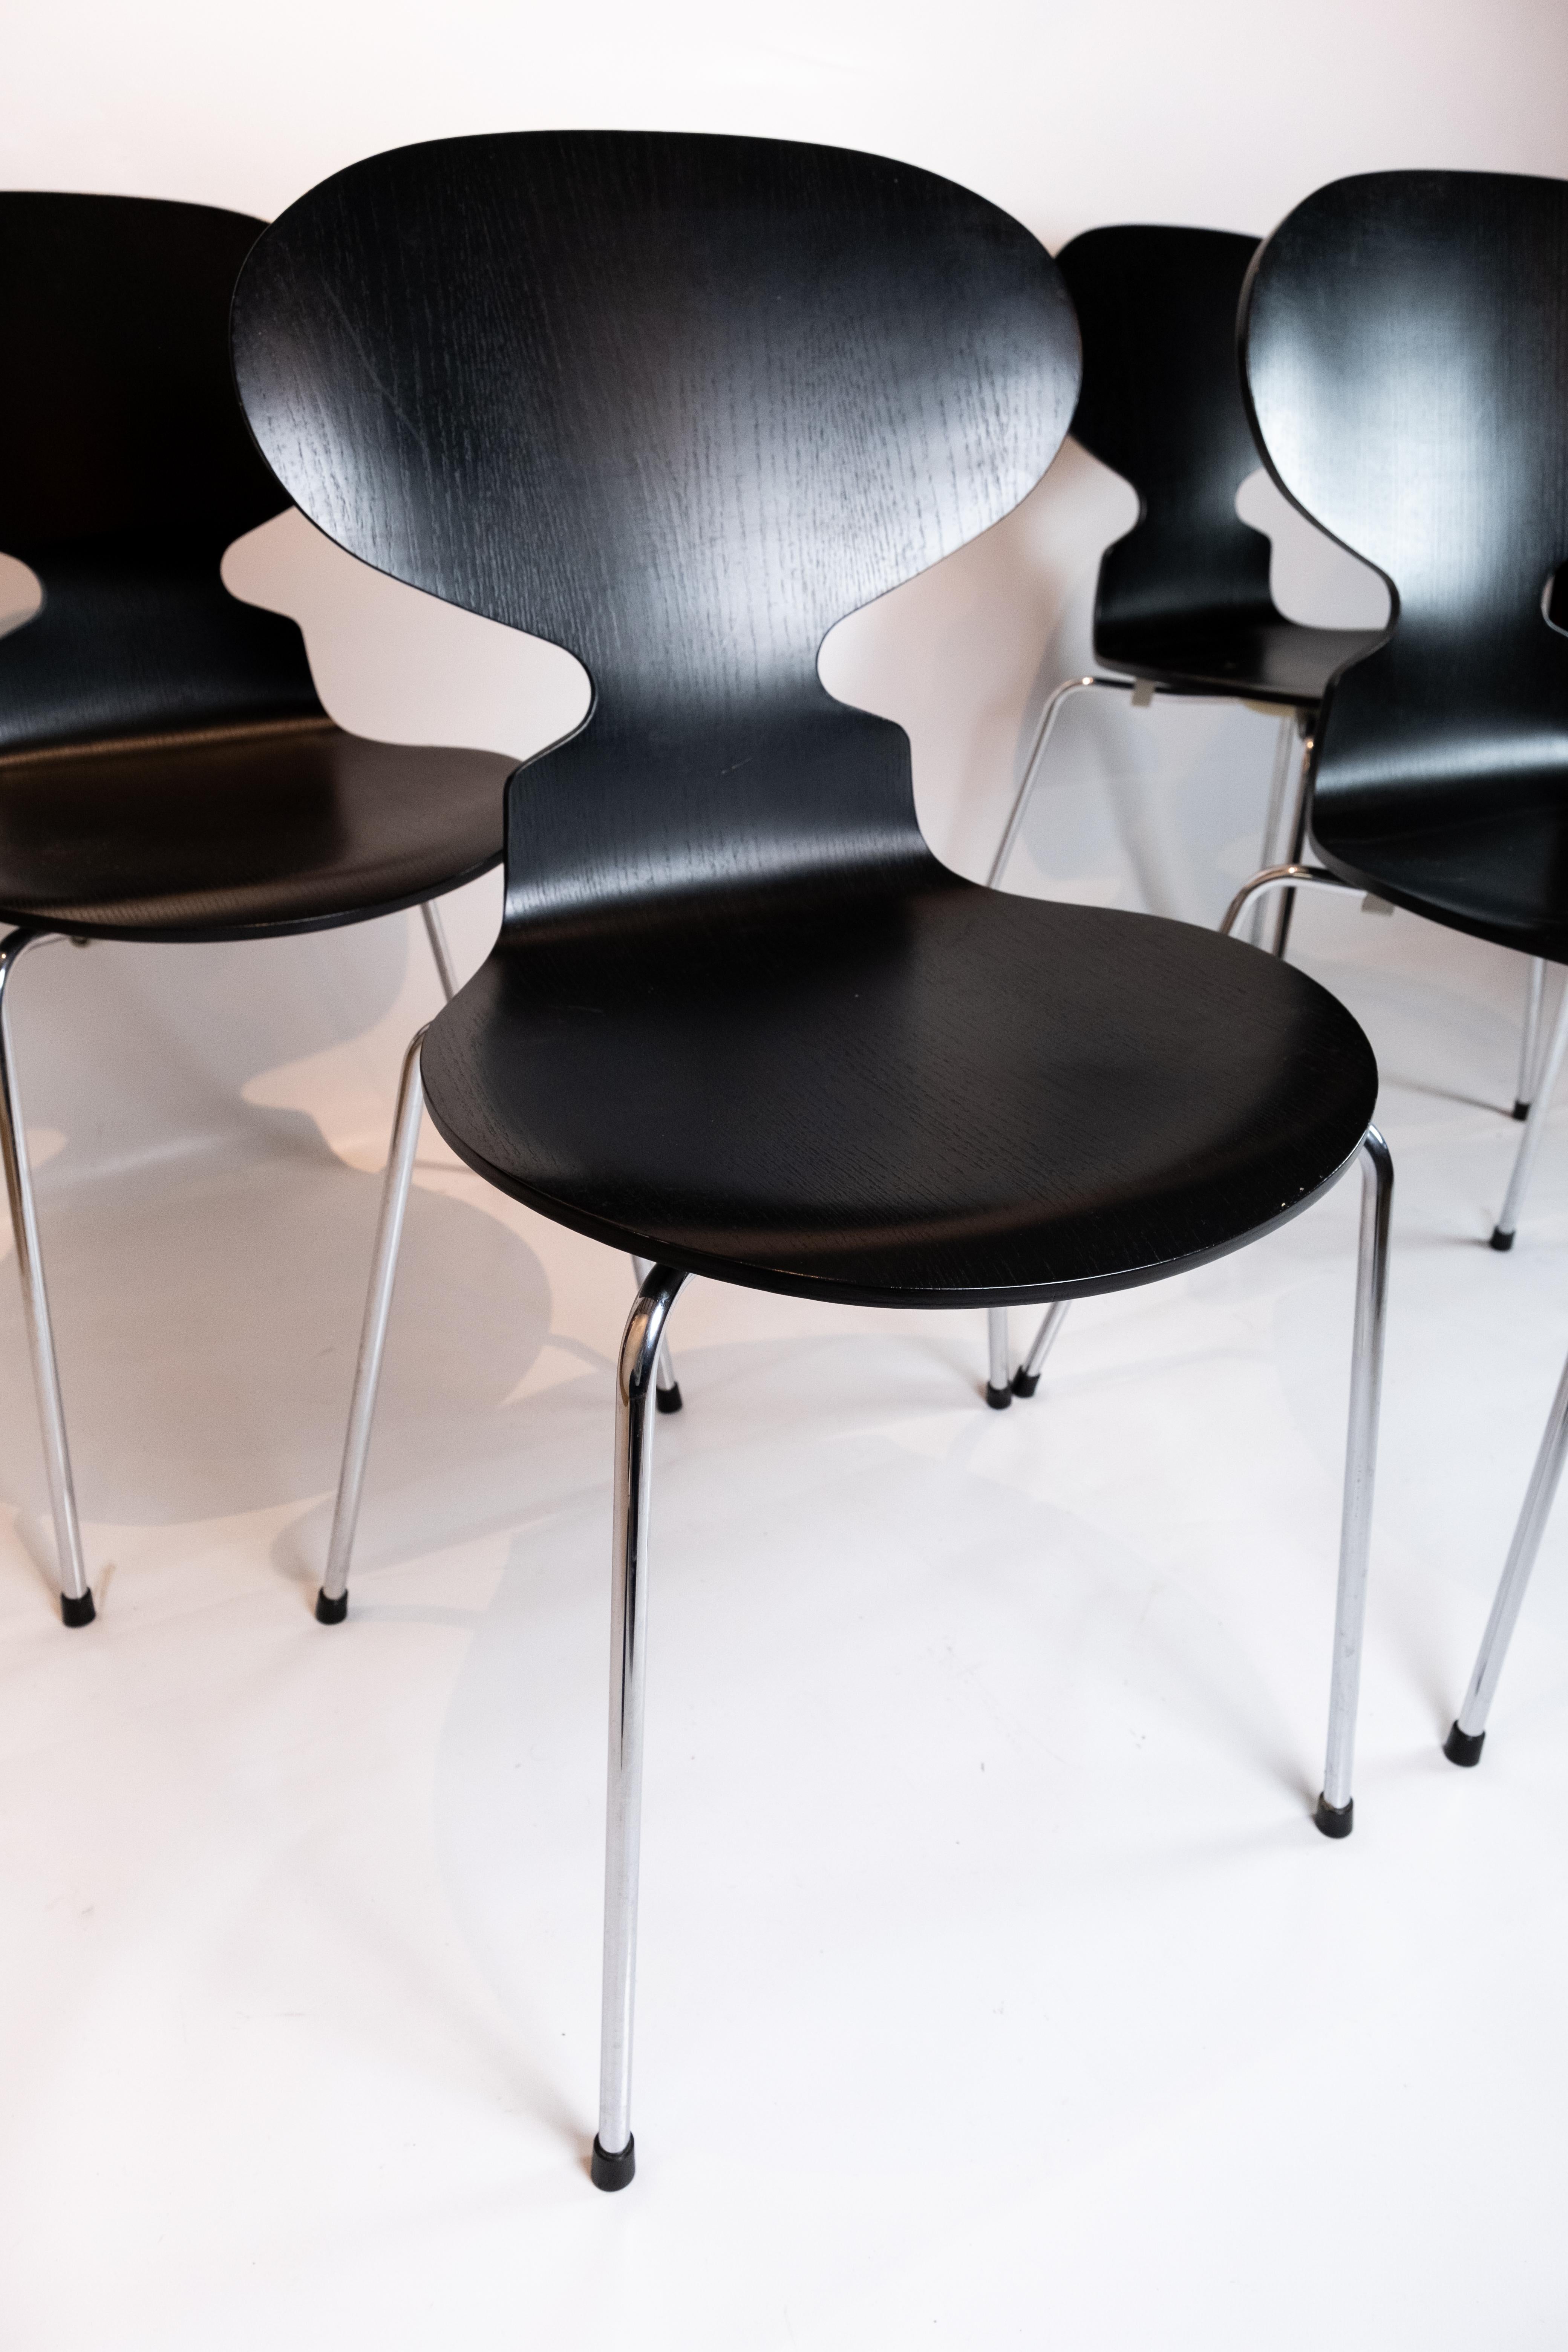 Scandinavian Modern Set of Four Black Ant Chairs, Model 3101, Designed by Arne Jacobsen in 1952 For Sale